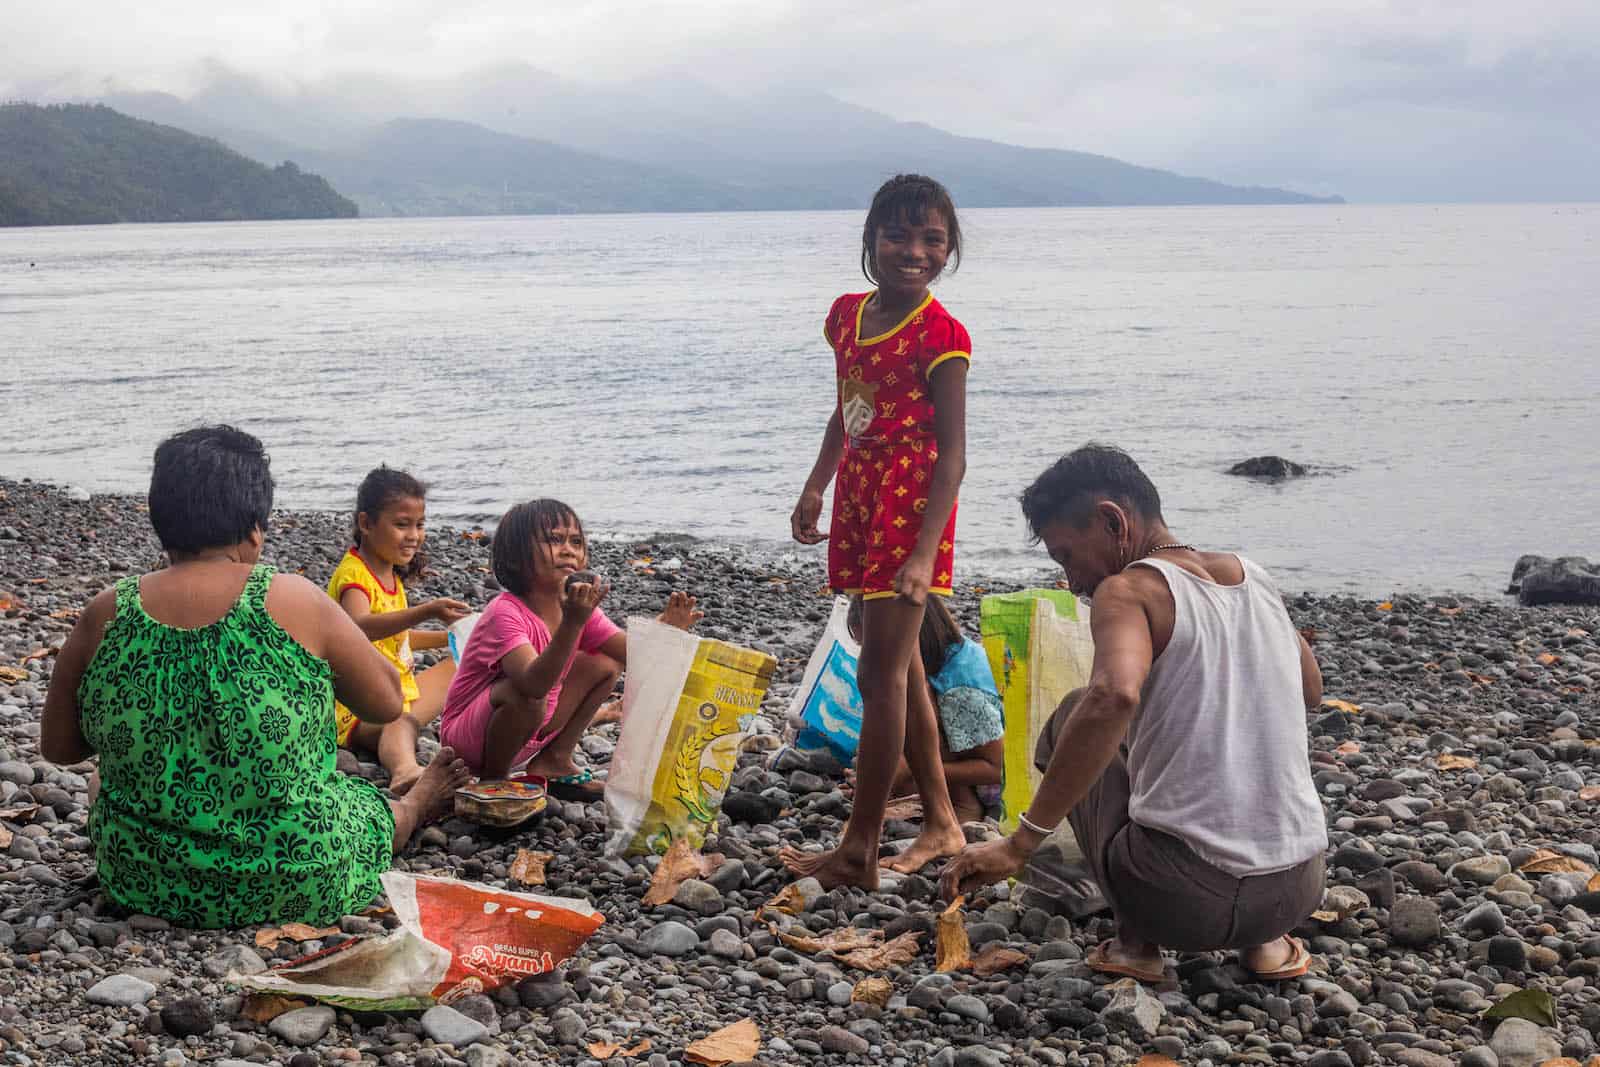 A girl stands on the beach, surrounded by girls and her grandparents collecting rocks. 